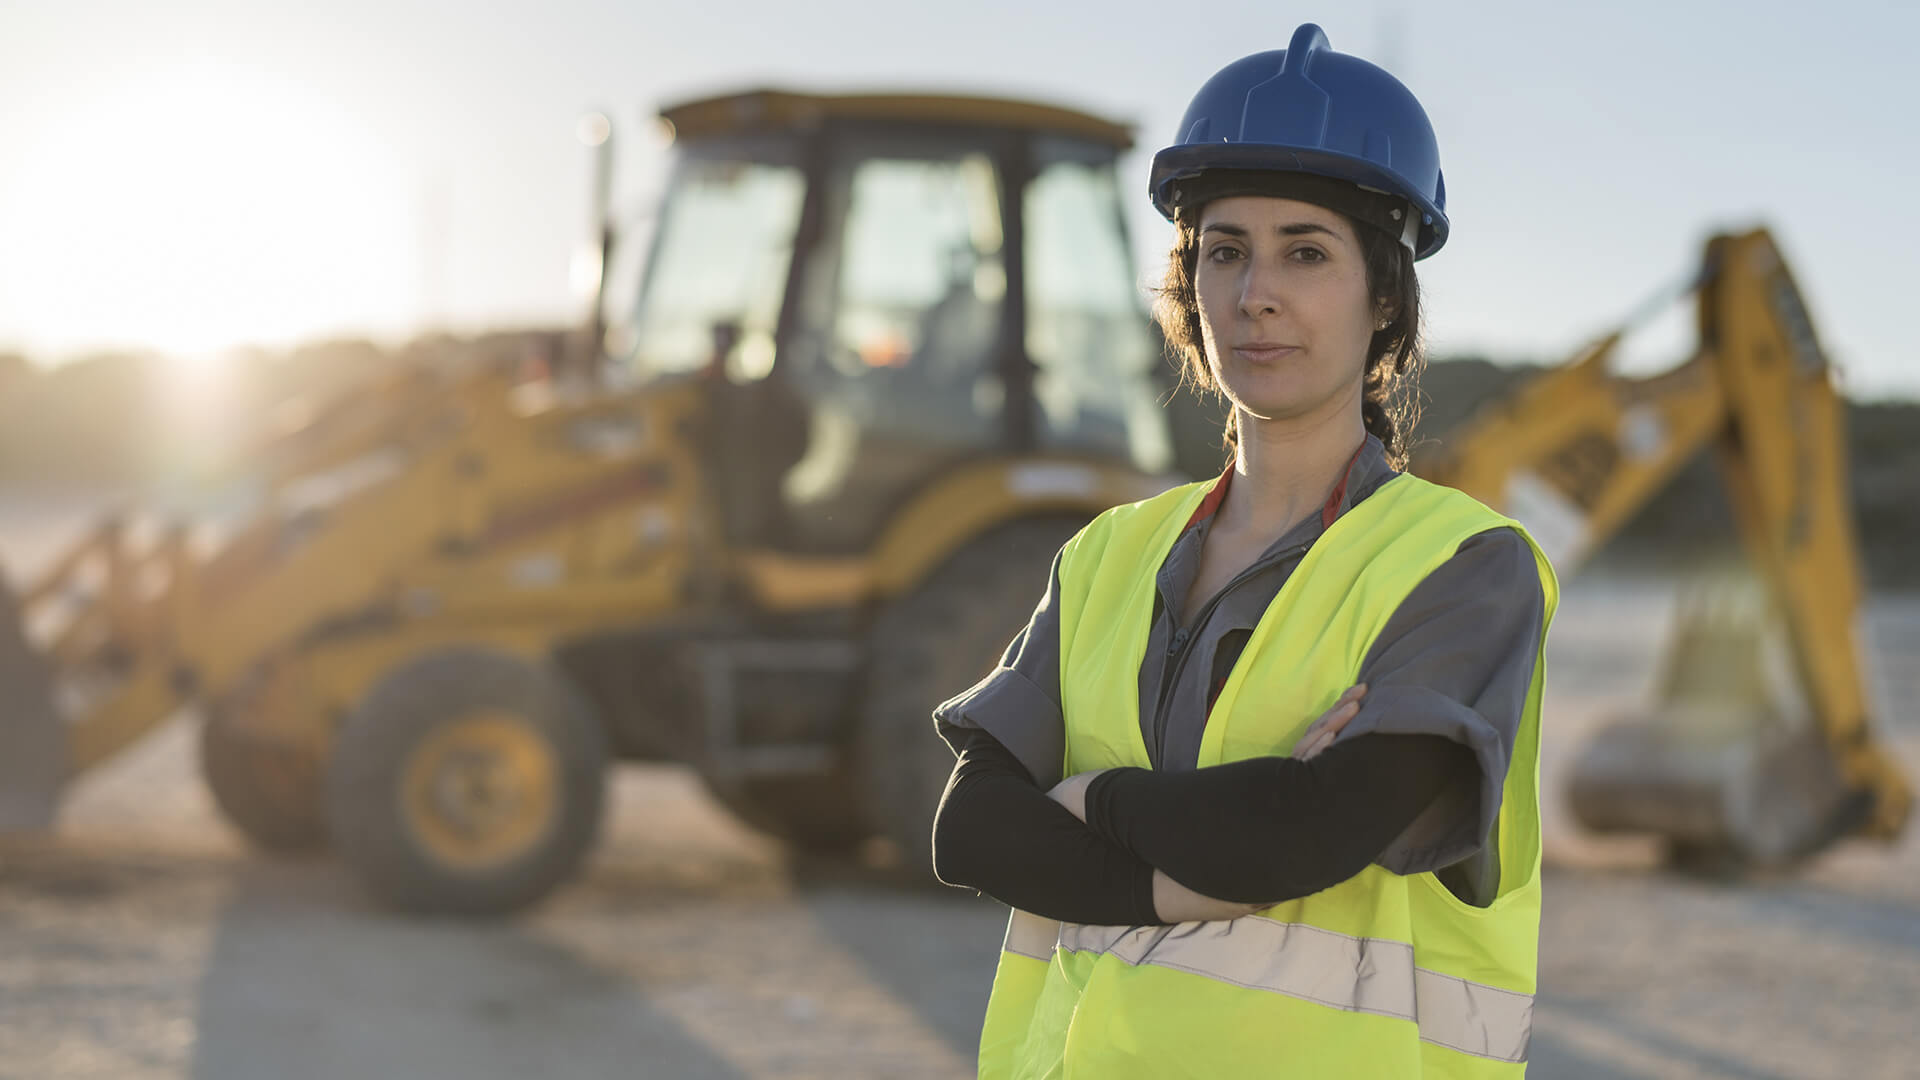 More Women Working in Construction